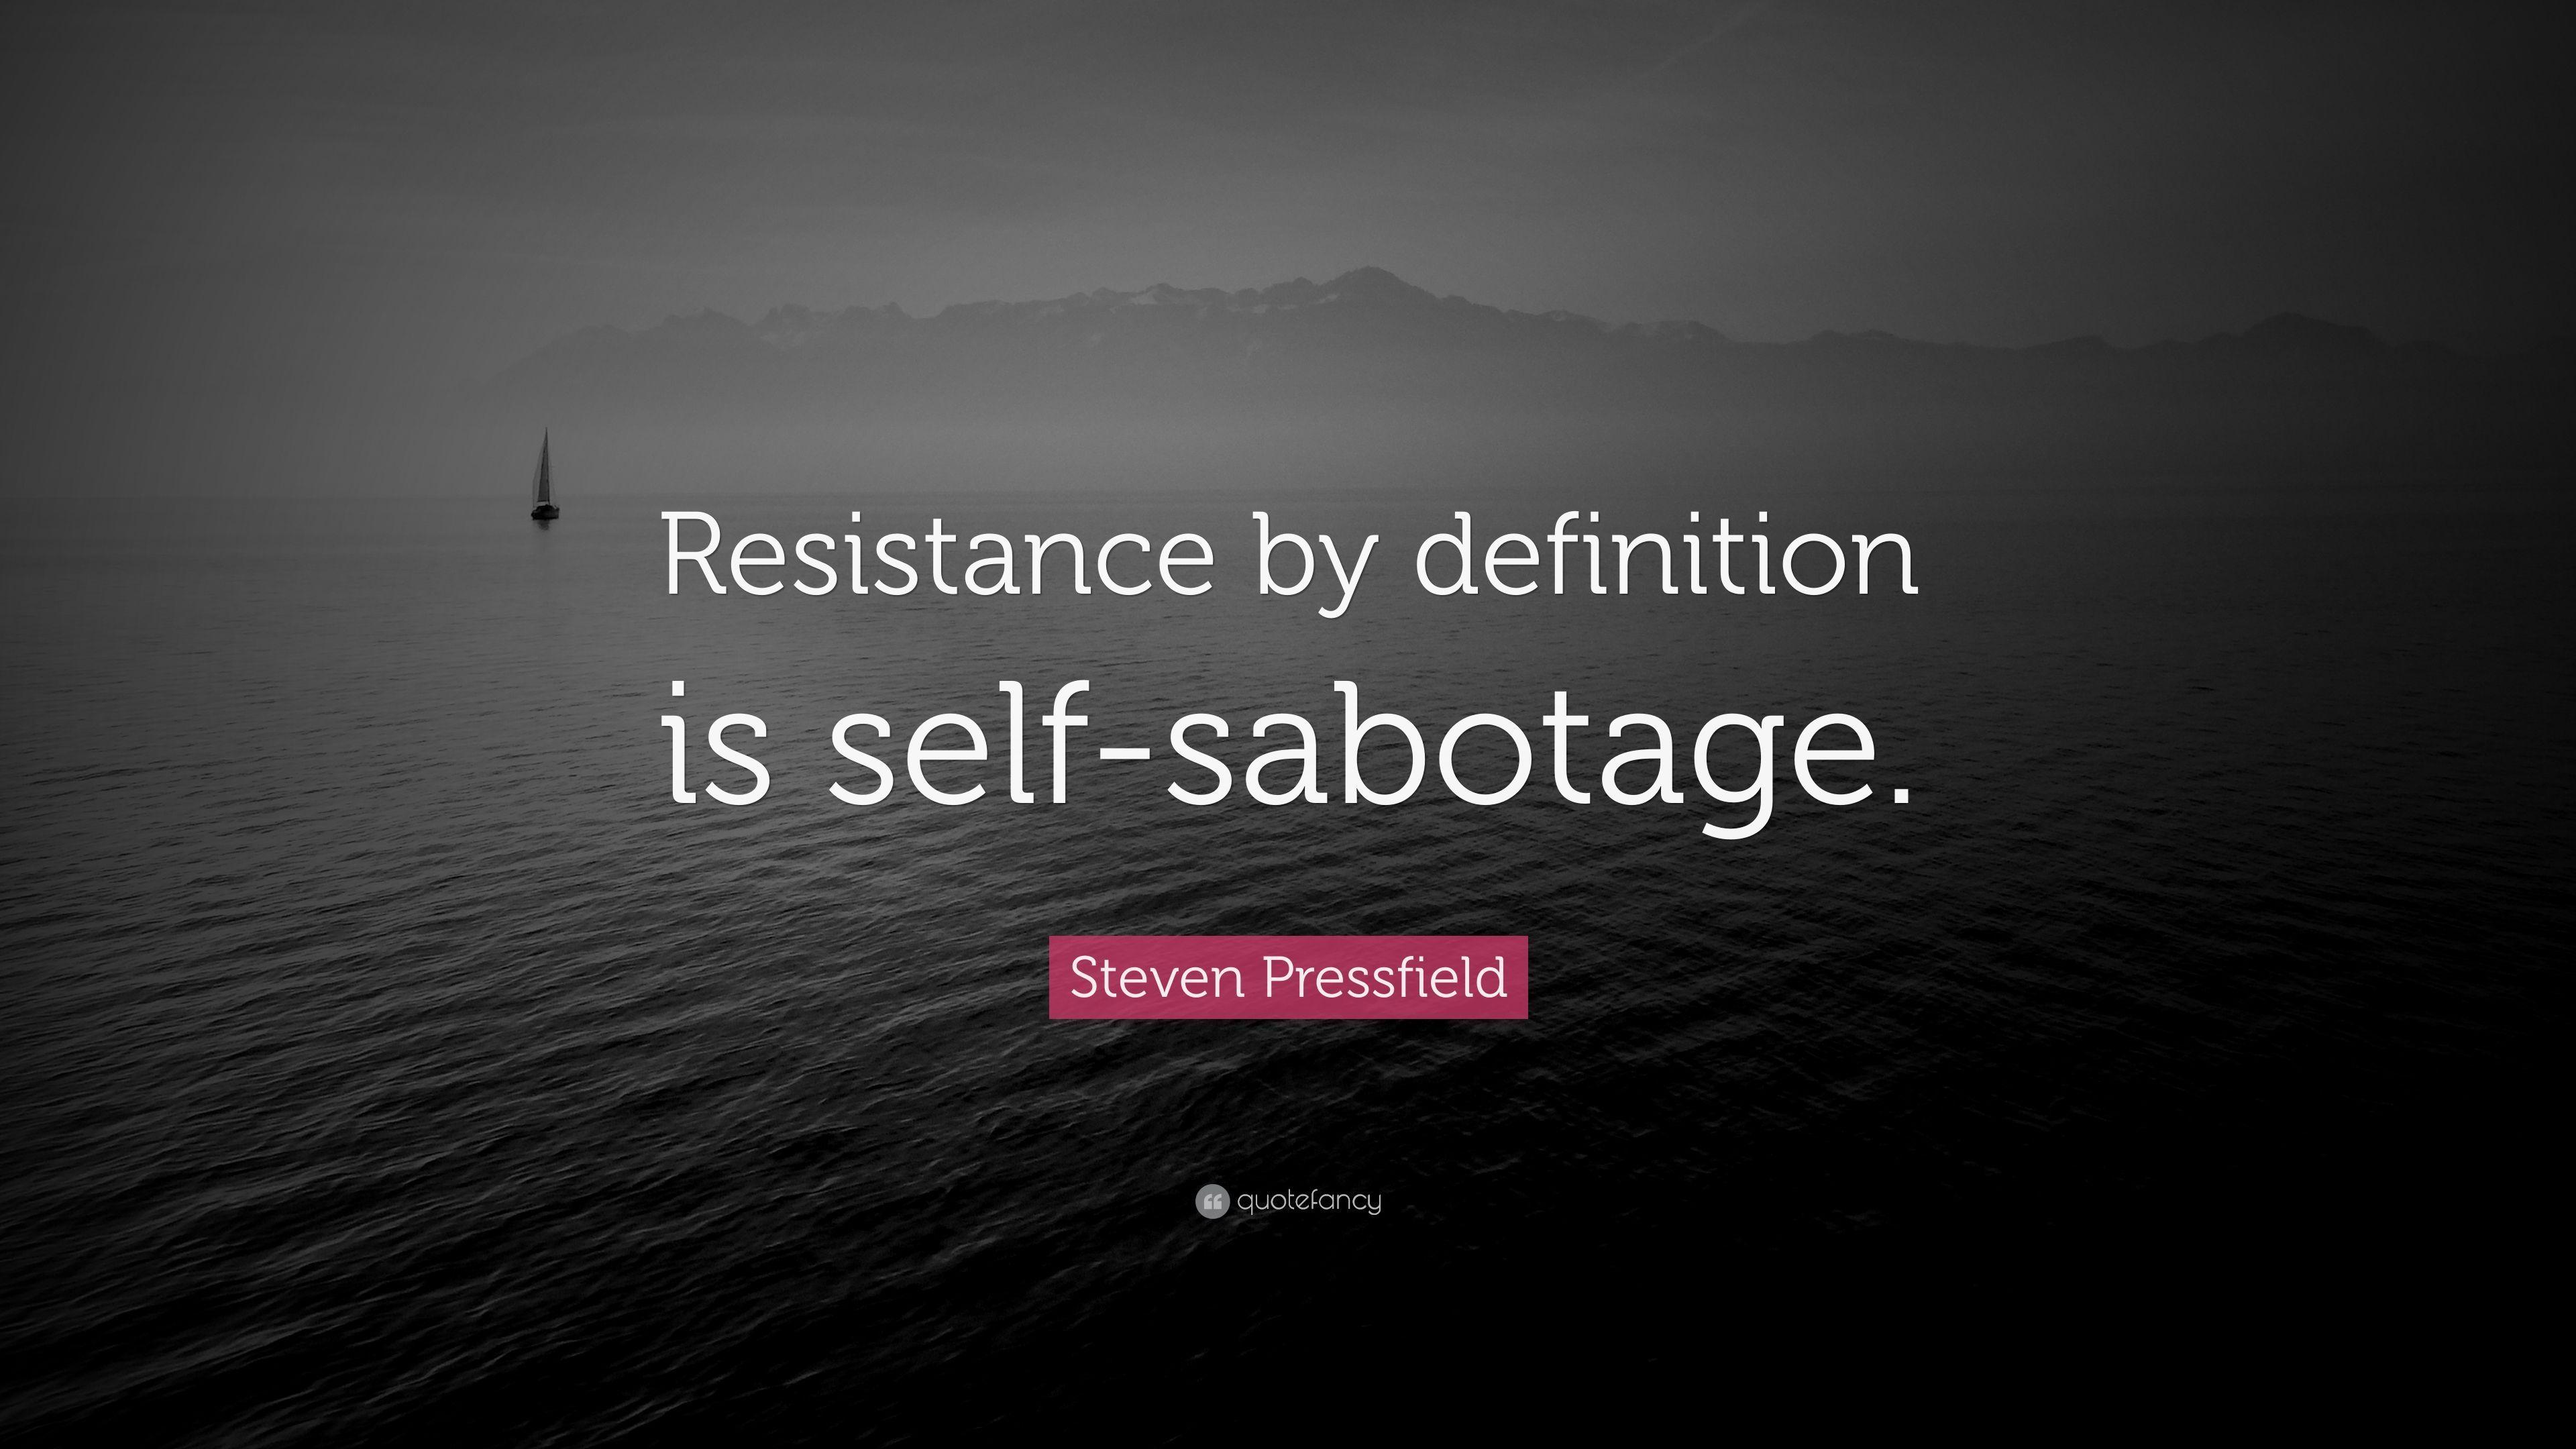 Steven Pressfield Quote: “Resistance By Definition Is Self Sabotage